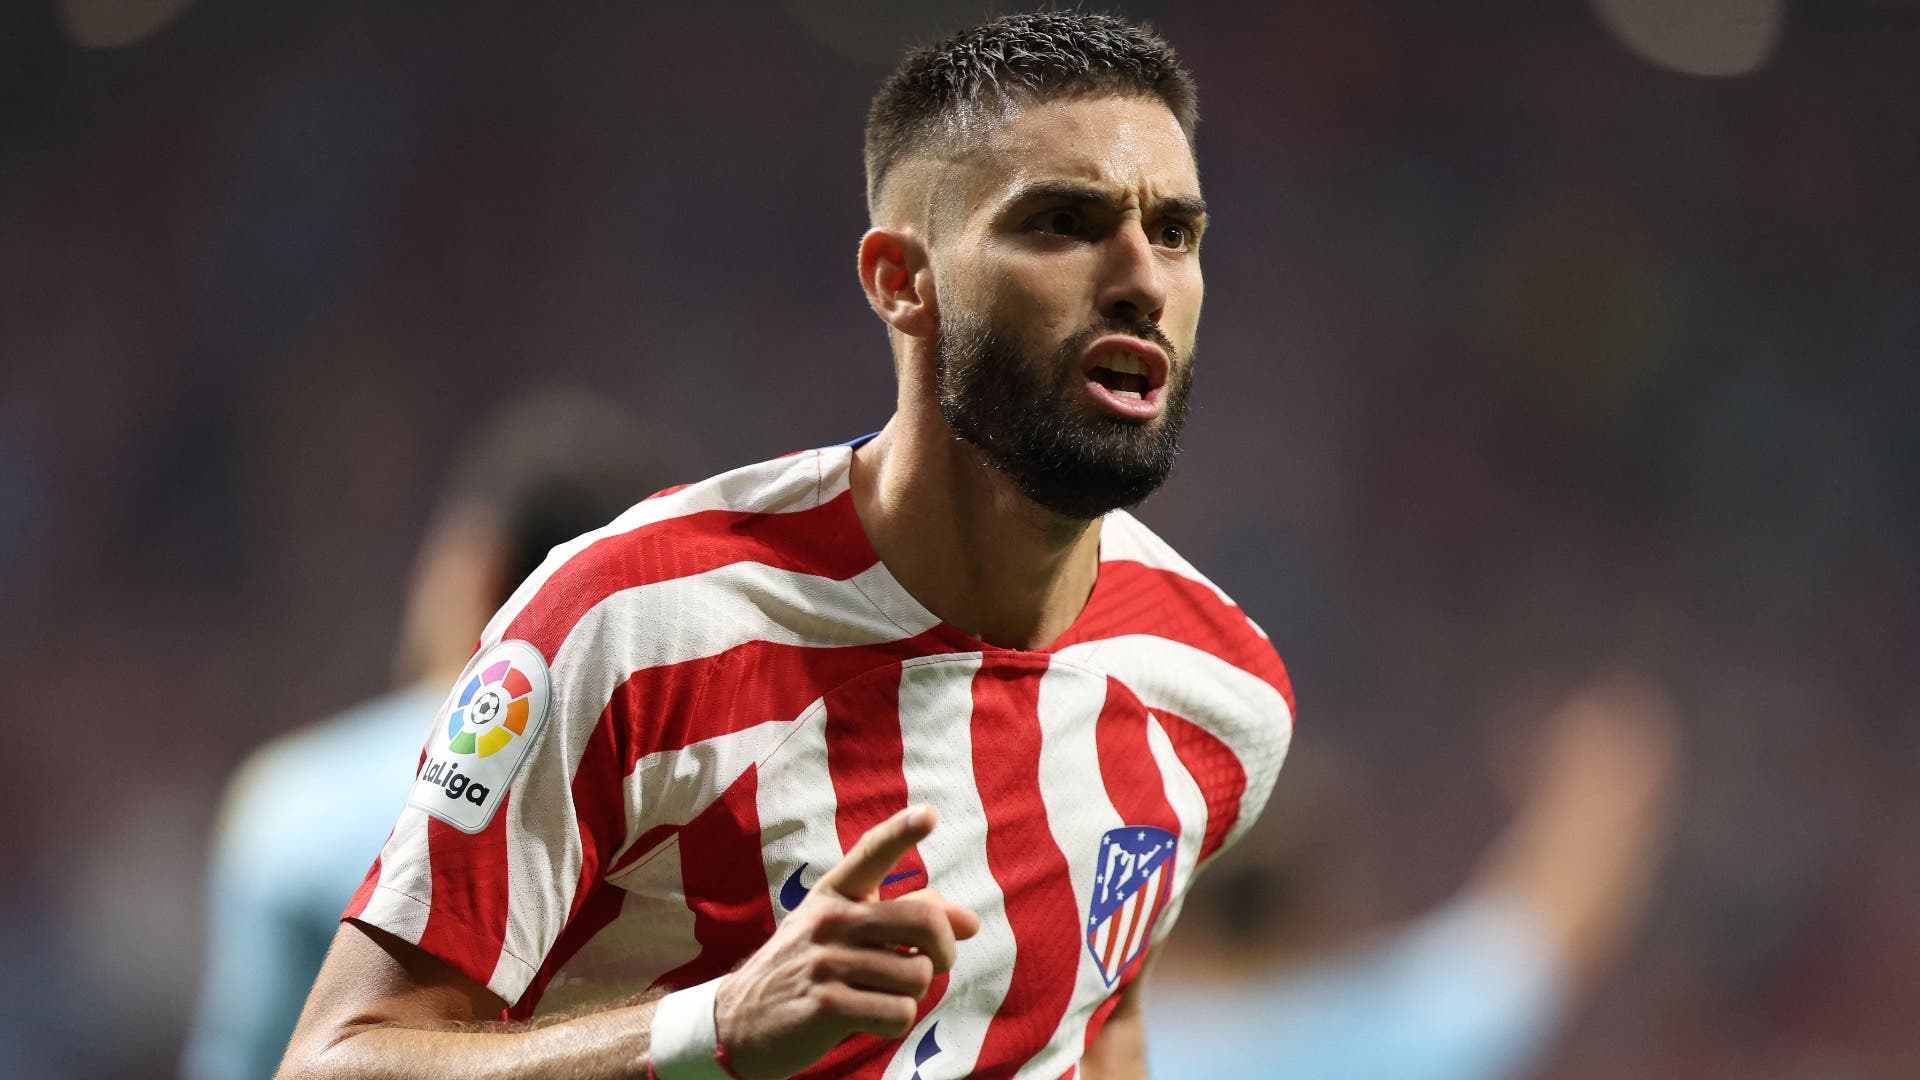 Carrasco already knows Atlético's plans with its sale
	
